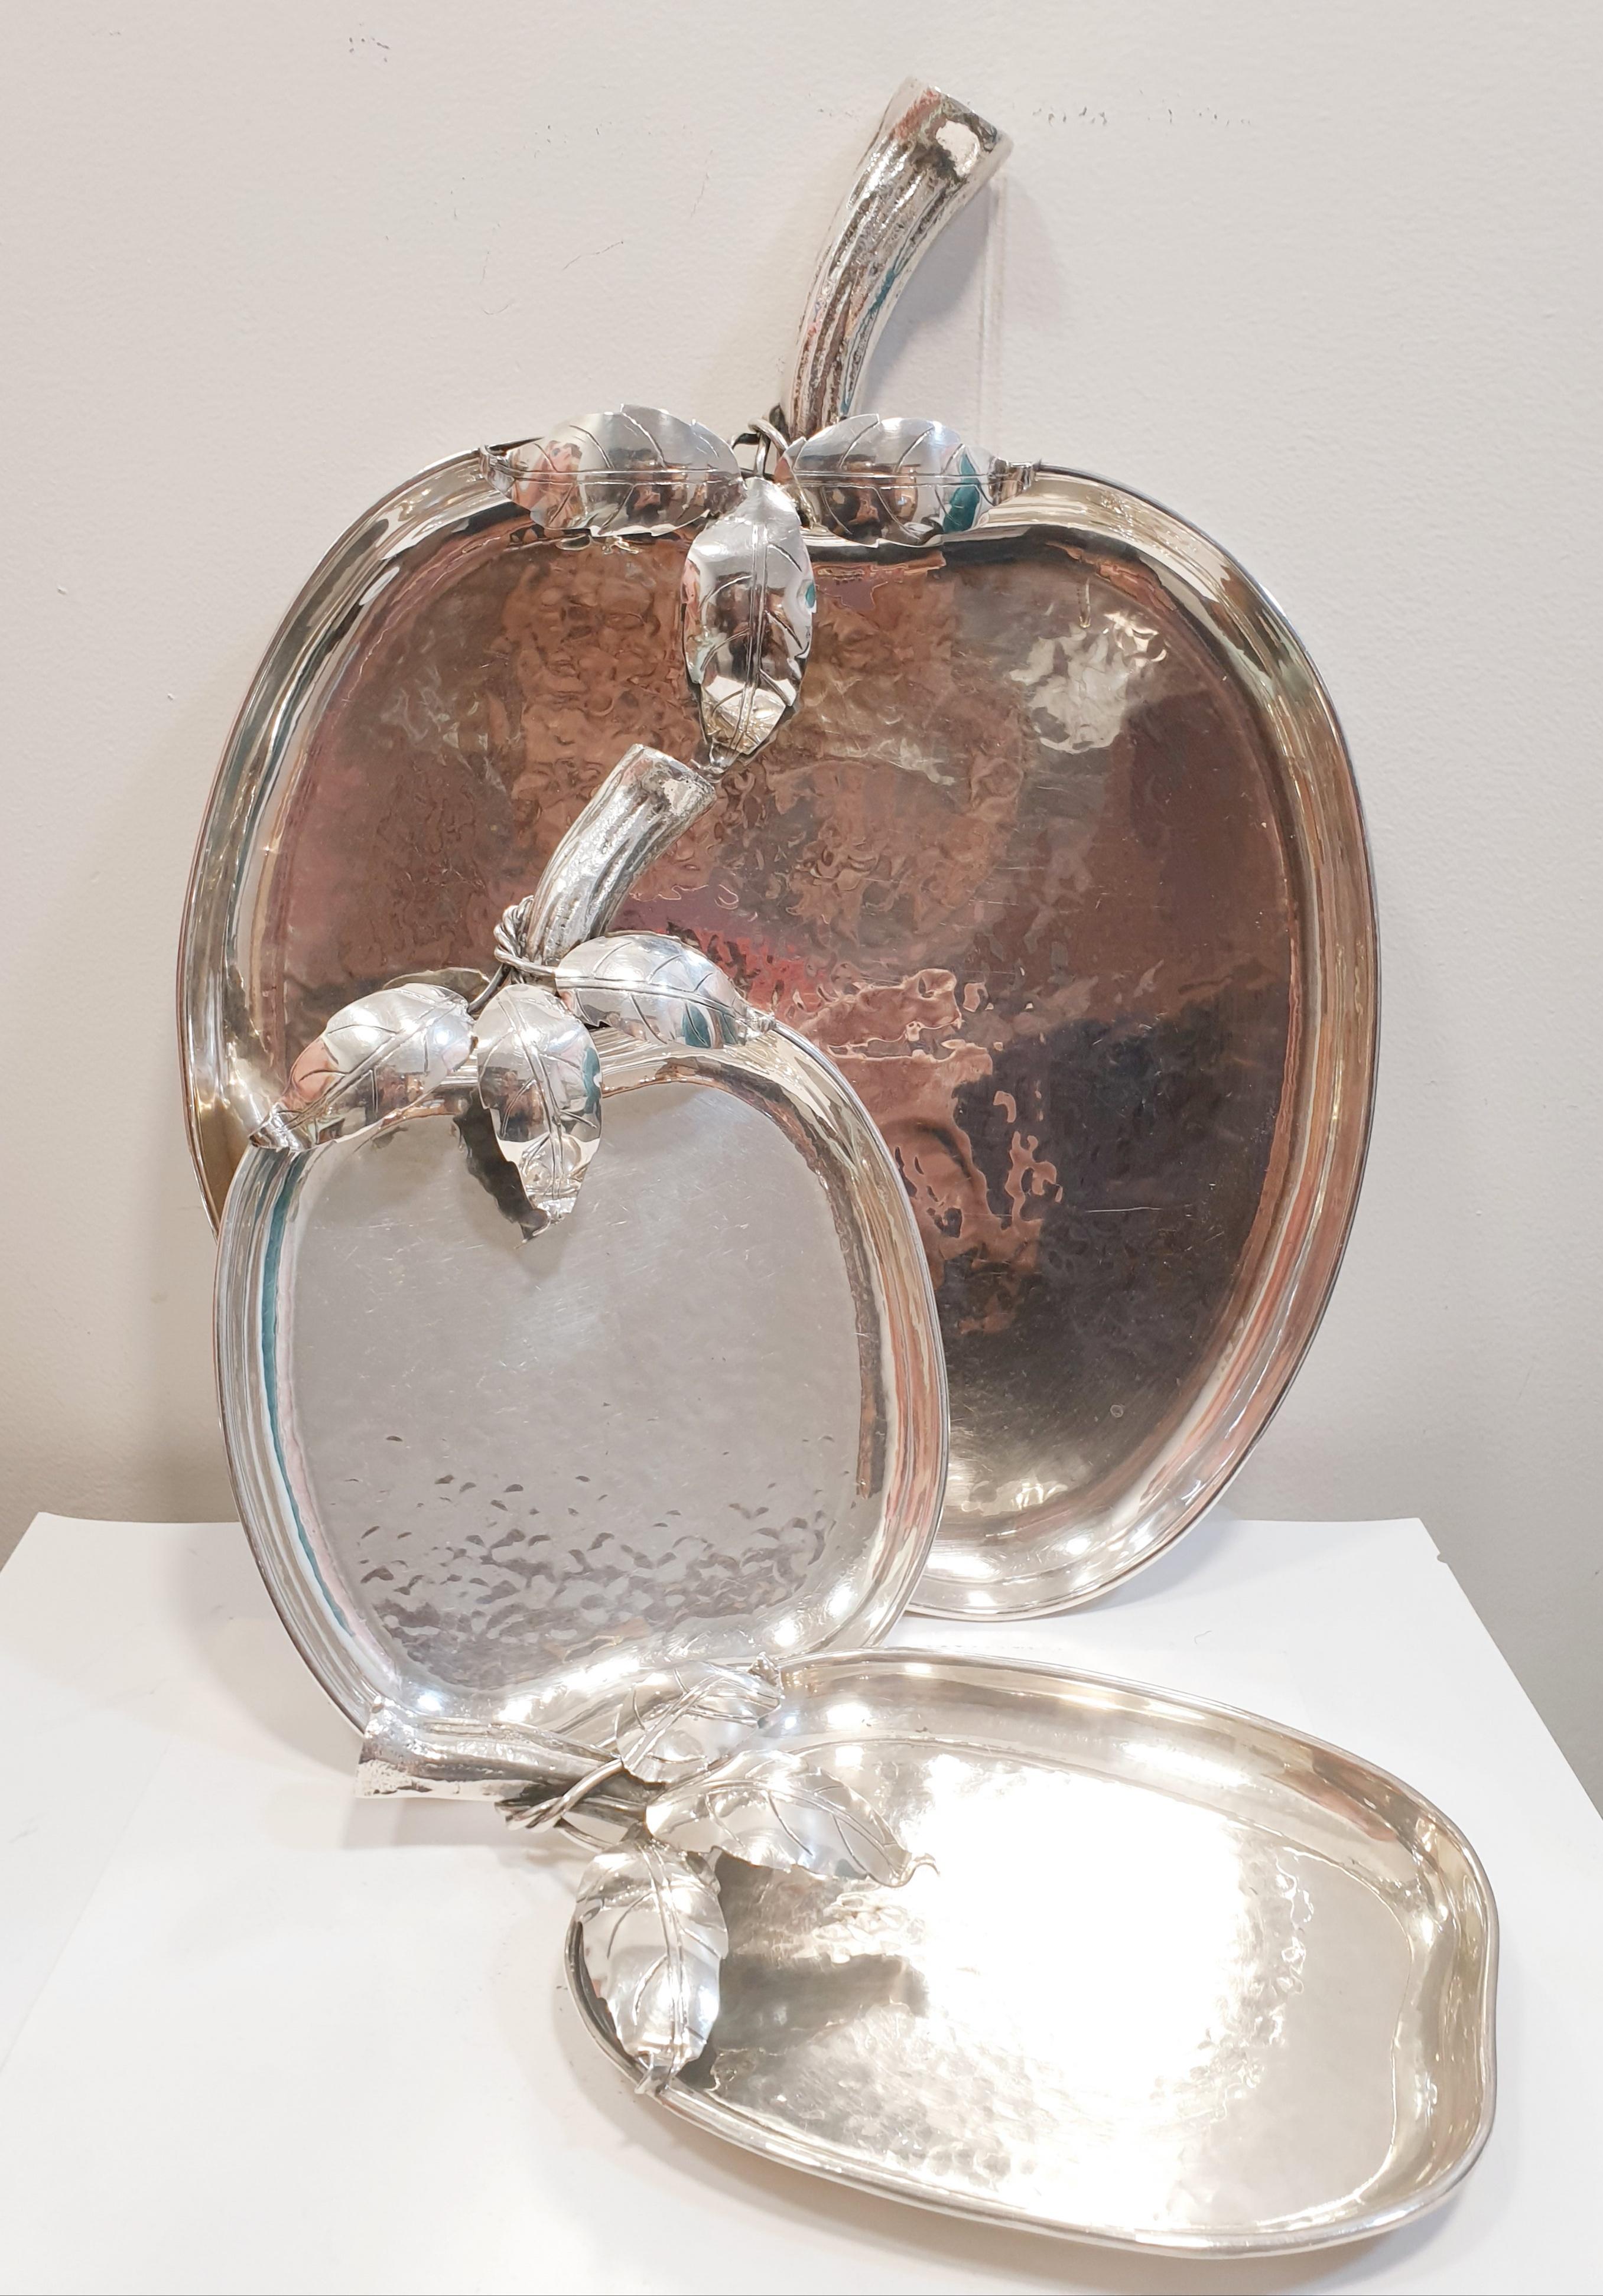 Antique Silver Tray from the 19th Century. The tray simulates an Apple

PRADERA is a second generation of a family run business jewelers of reference in Spain, with a rich track record being official distributers of prime European jewelry brands